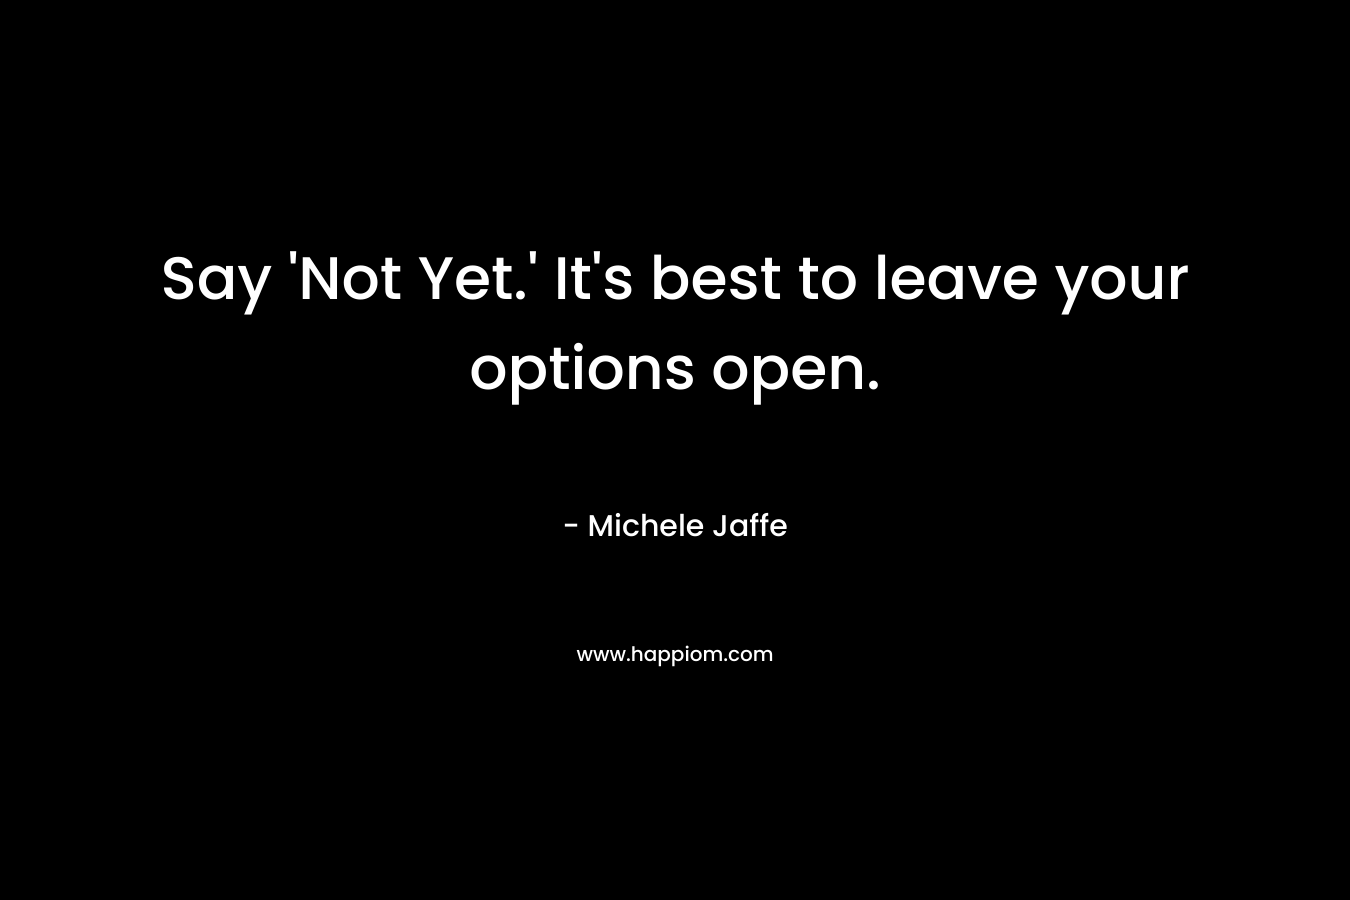 Say ‘Not Yet.’ It’s best to leave your options open. – Michele Jaffe